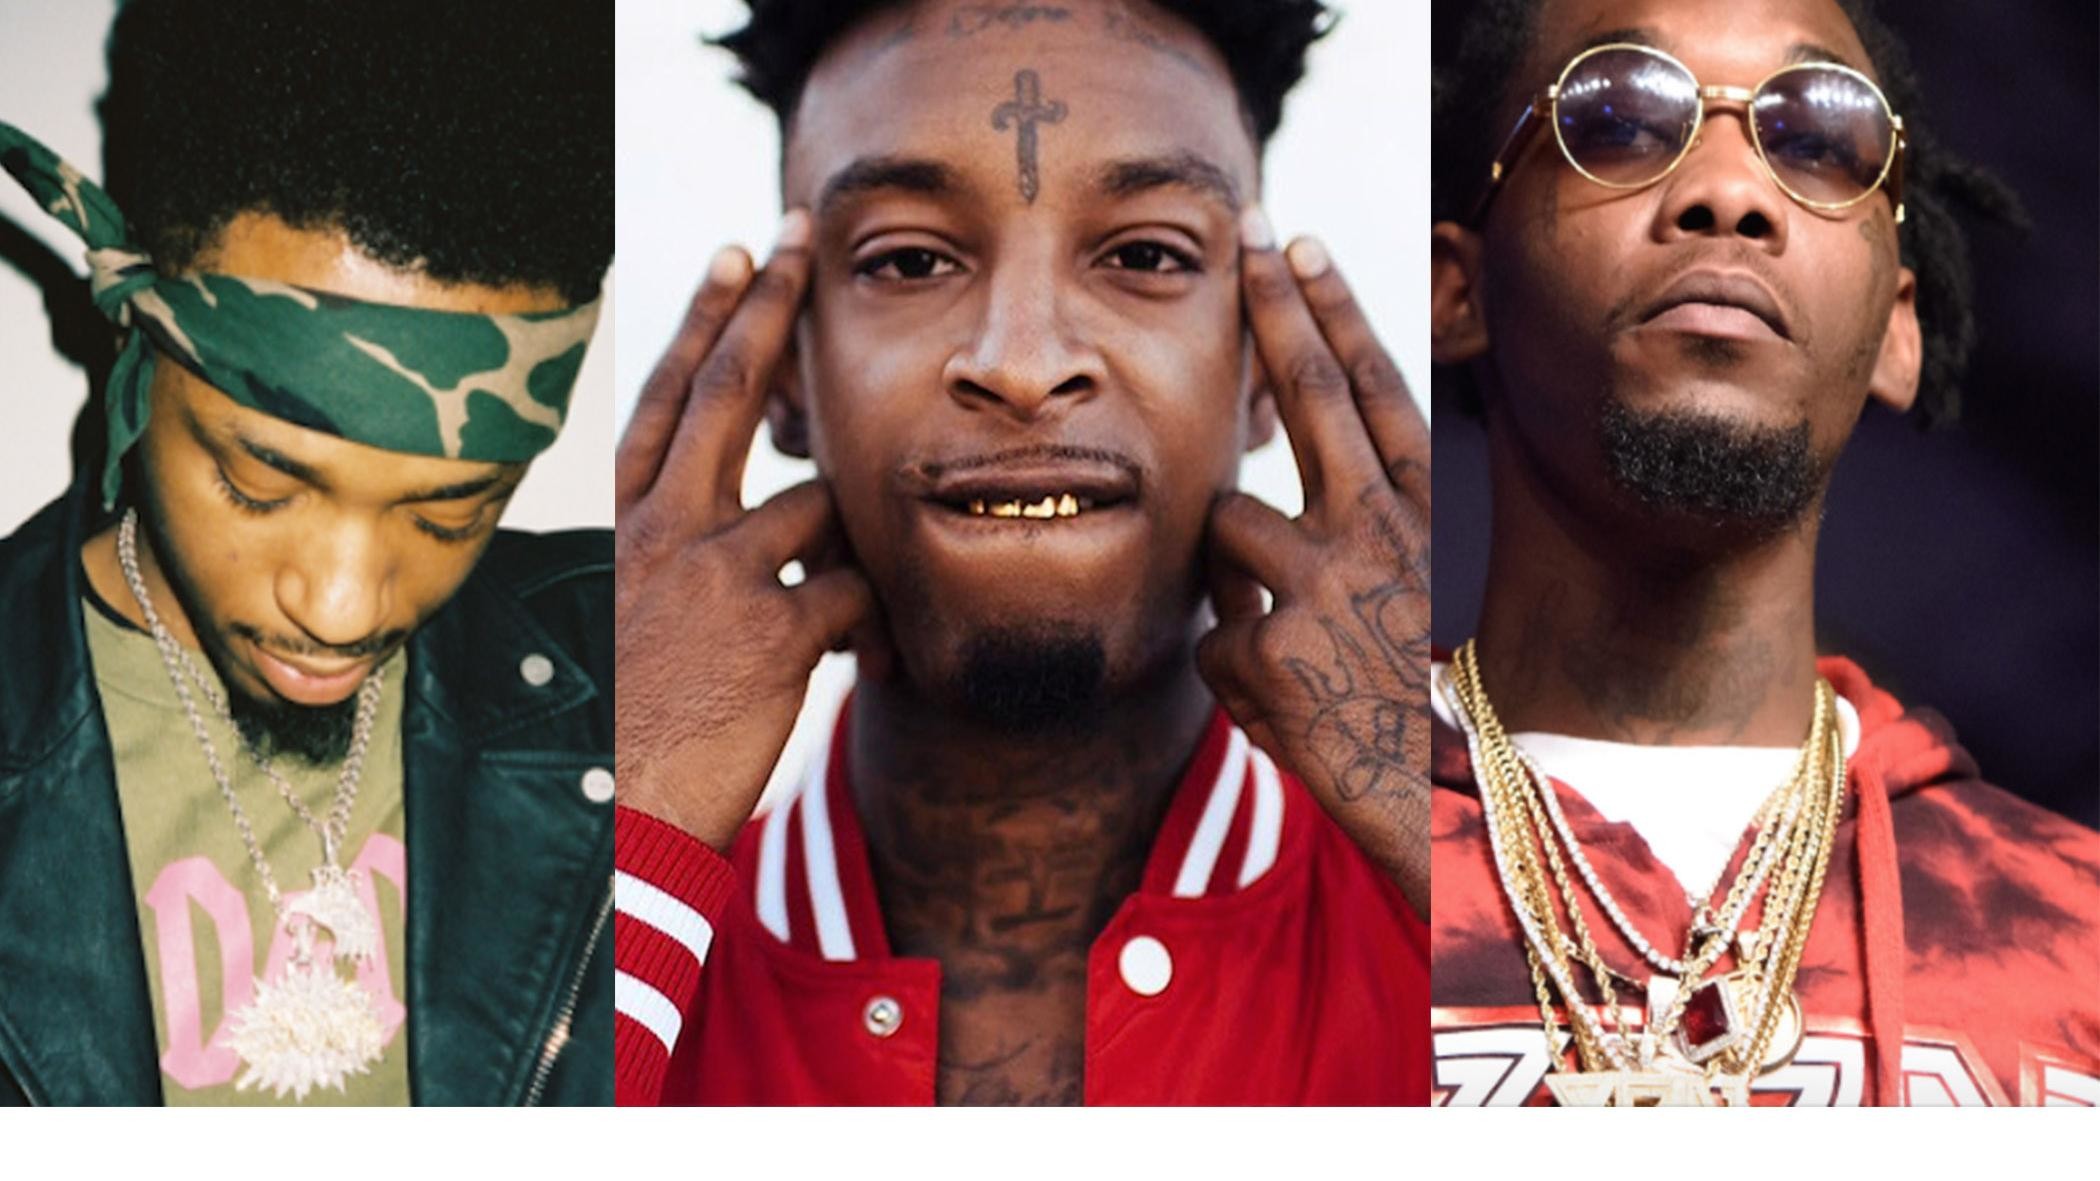 2100x1181 21 Savage arguably began his meteoric rise with Savage Mode last year,  thanks to inspired production from Metro Boomin that paired 21's sorrowful  aura with ...